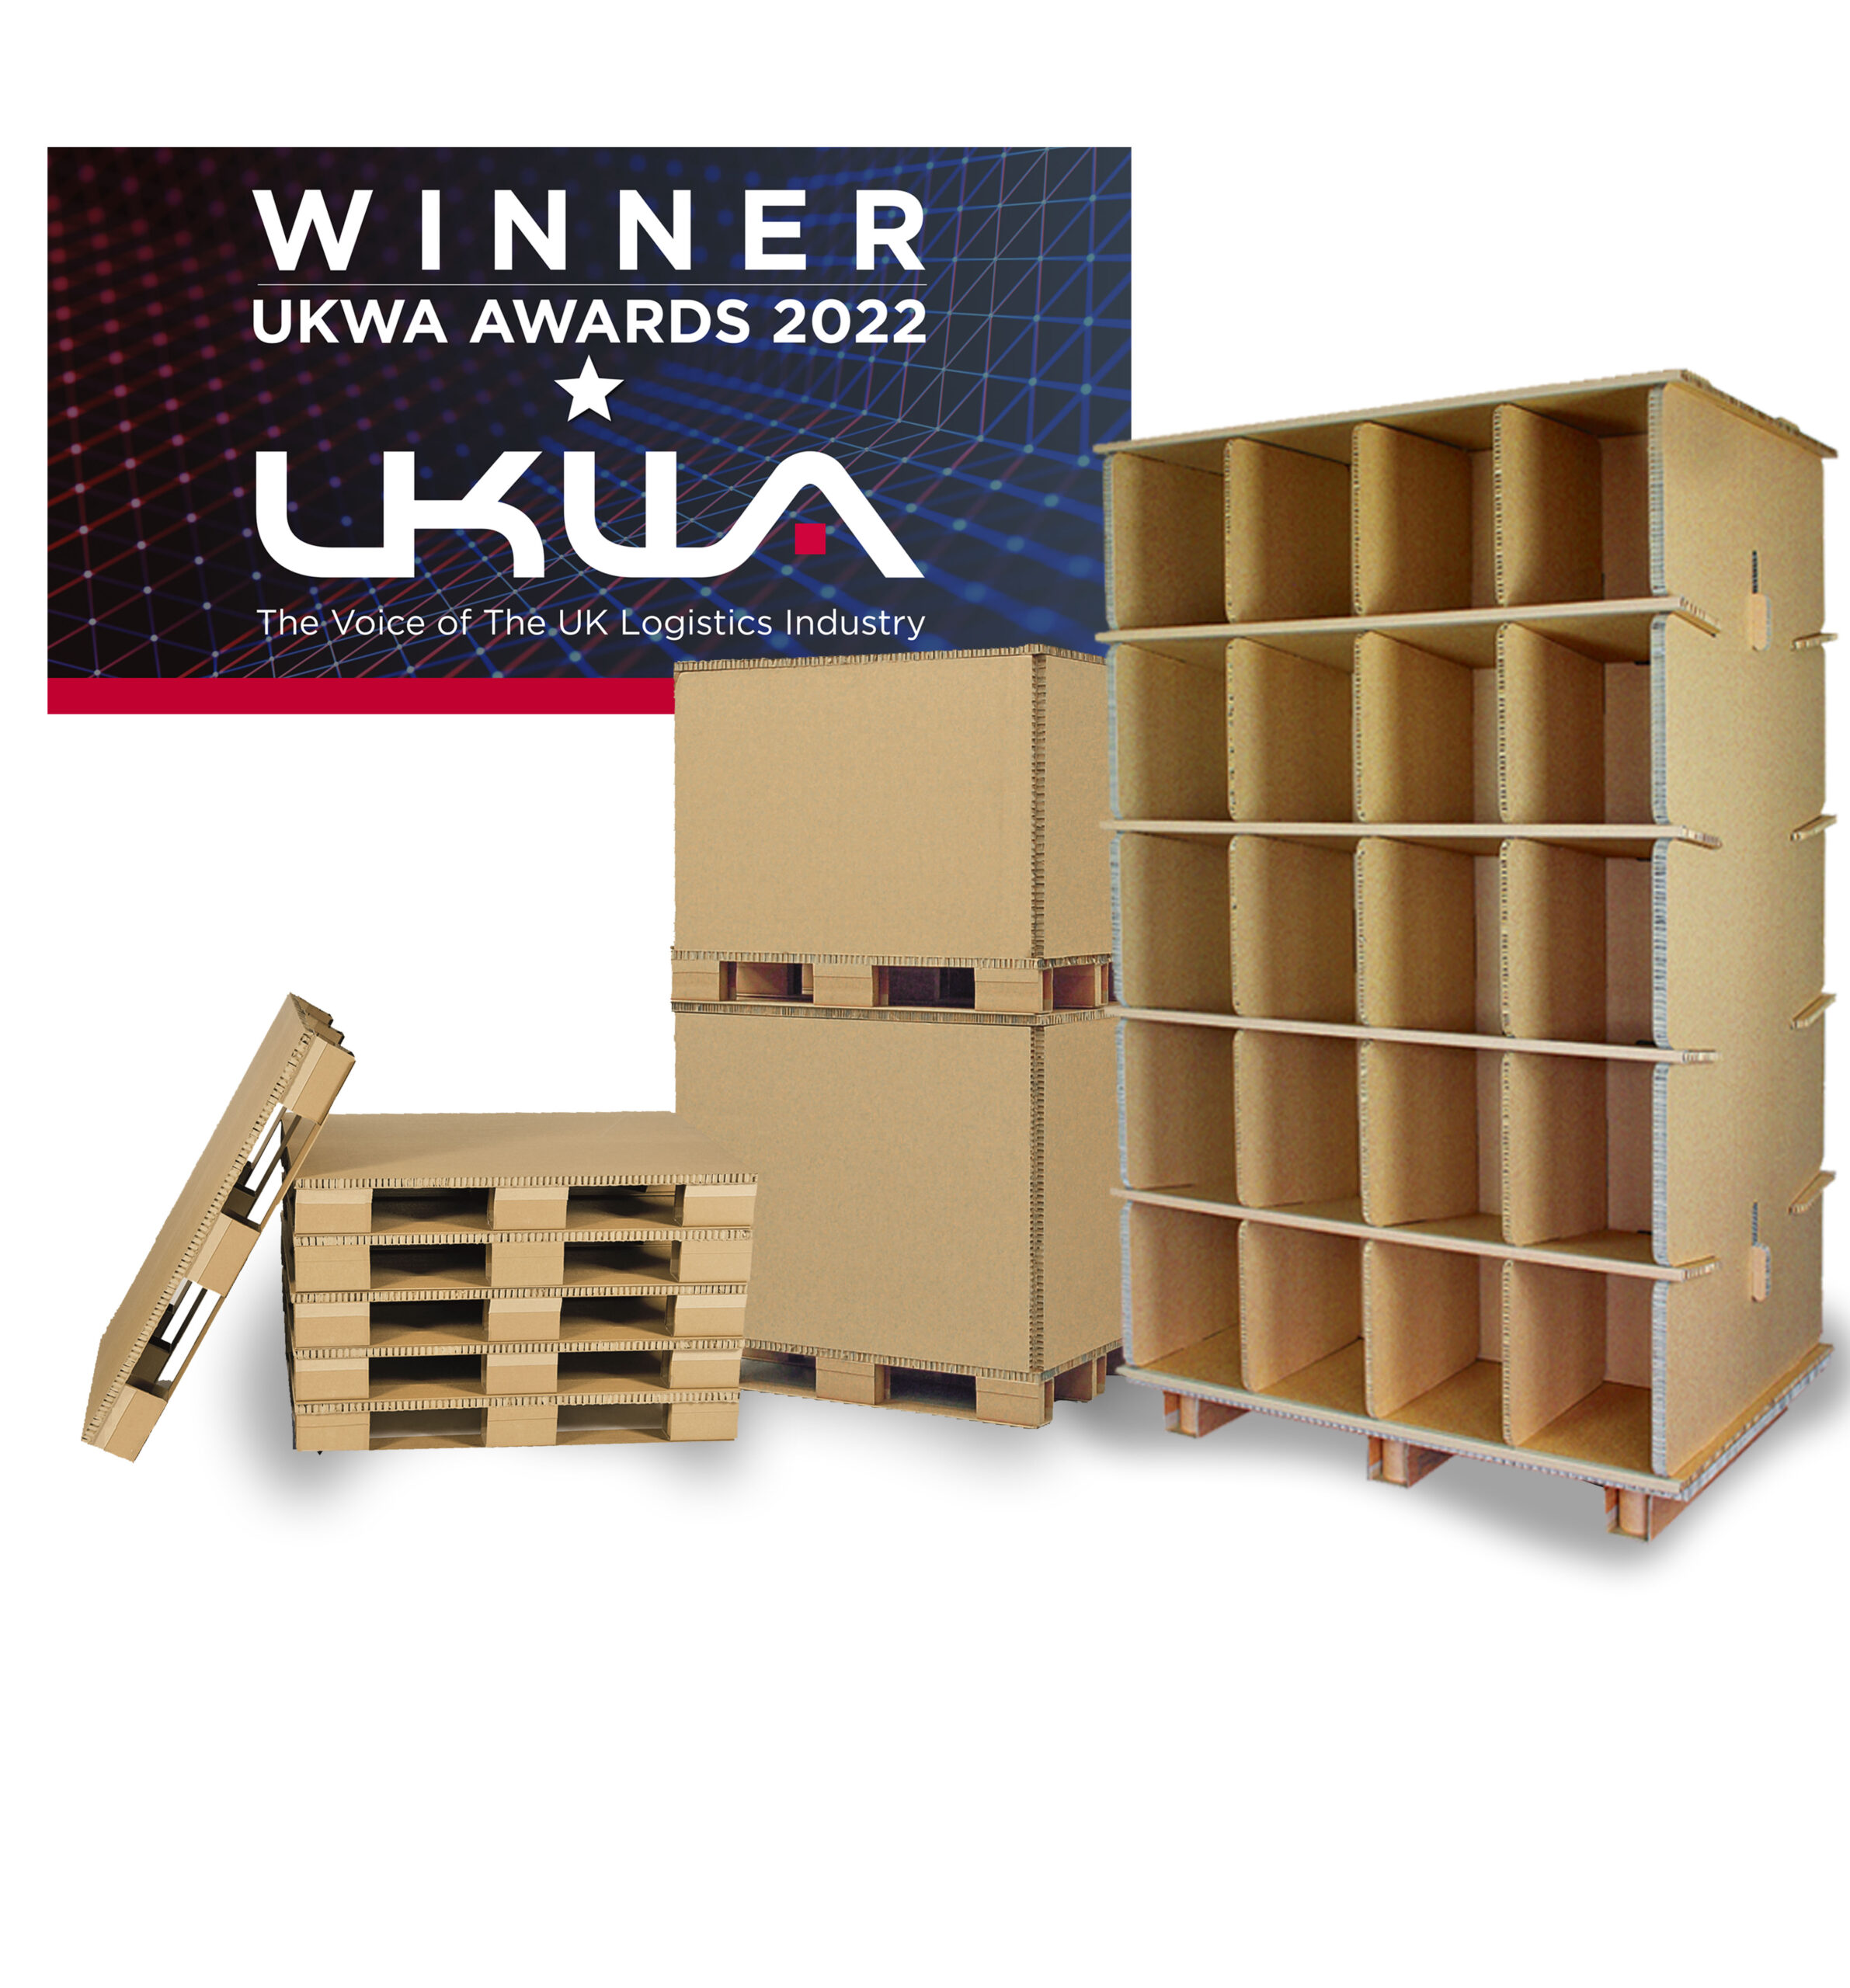 winner of the environment award with strong storage bins for warehousing